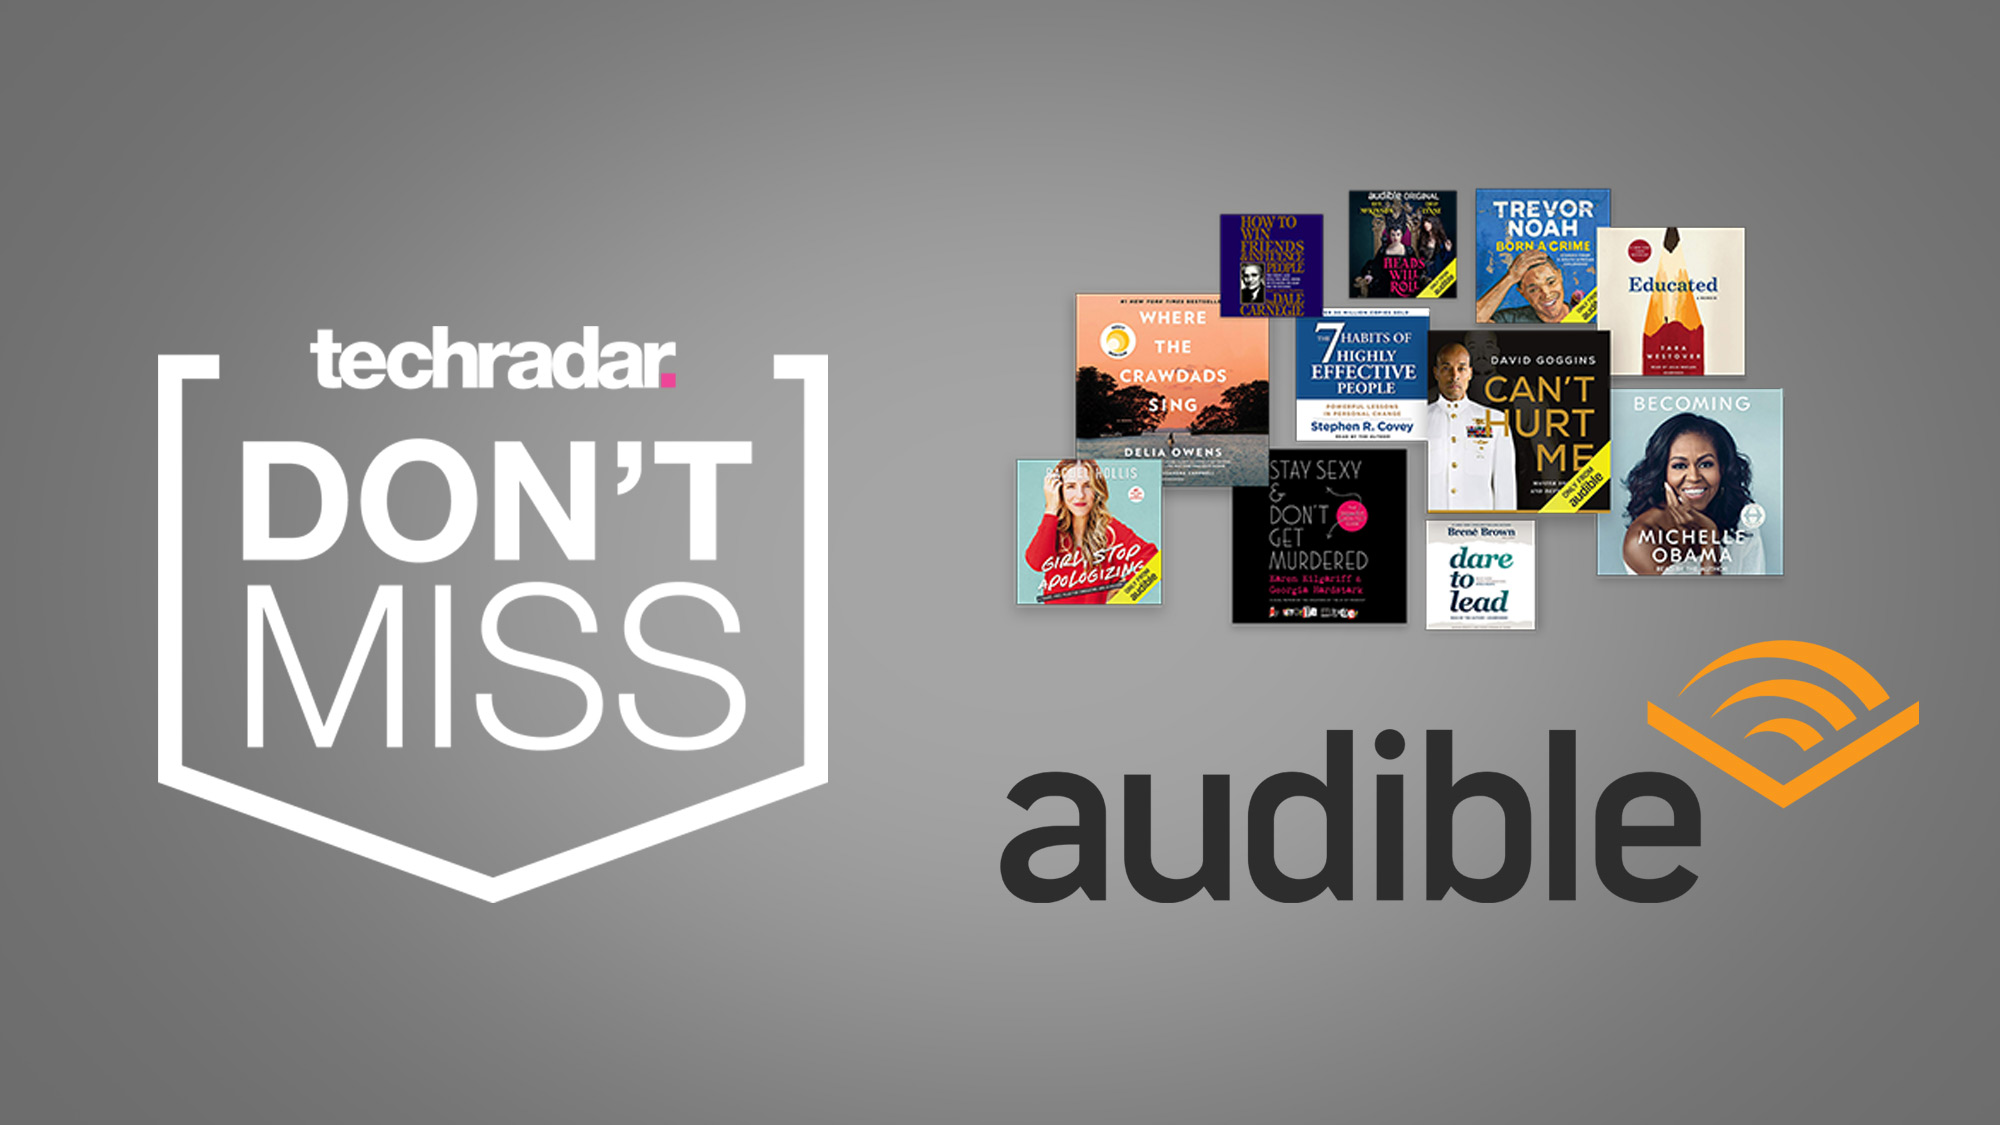 Get 3 months of Audible for just 99p per month with this limitedtime